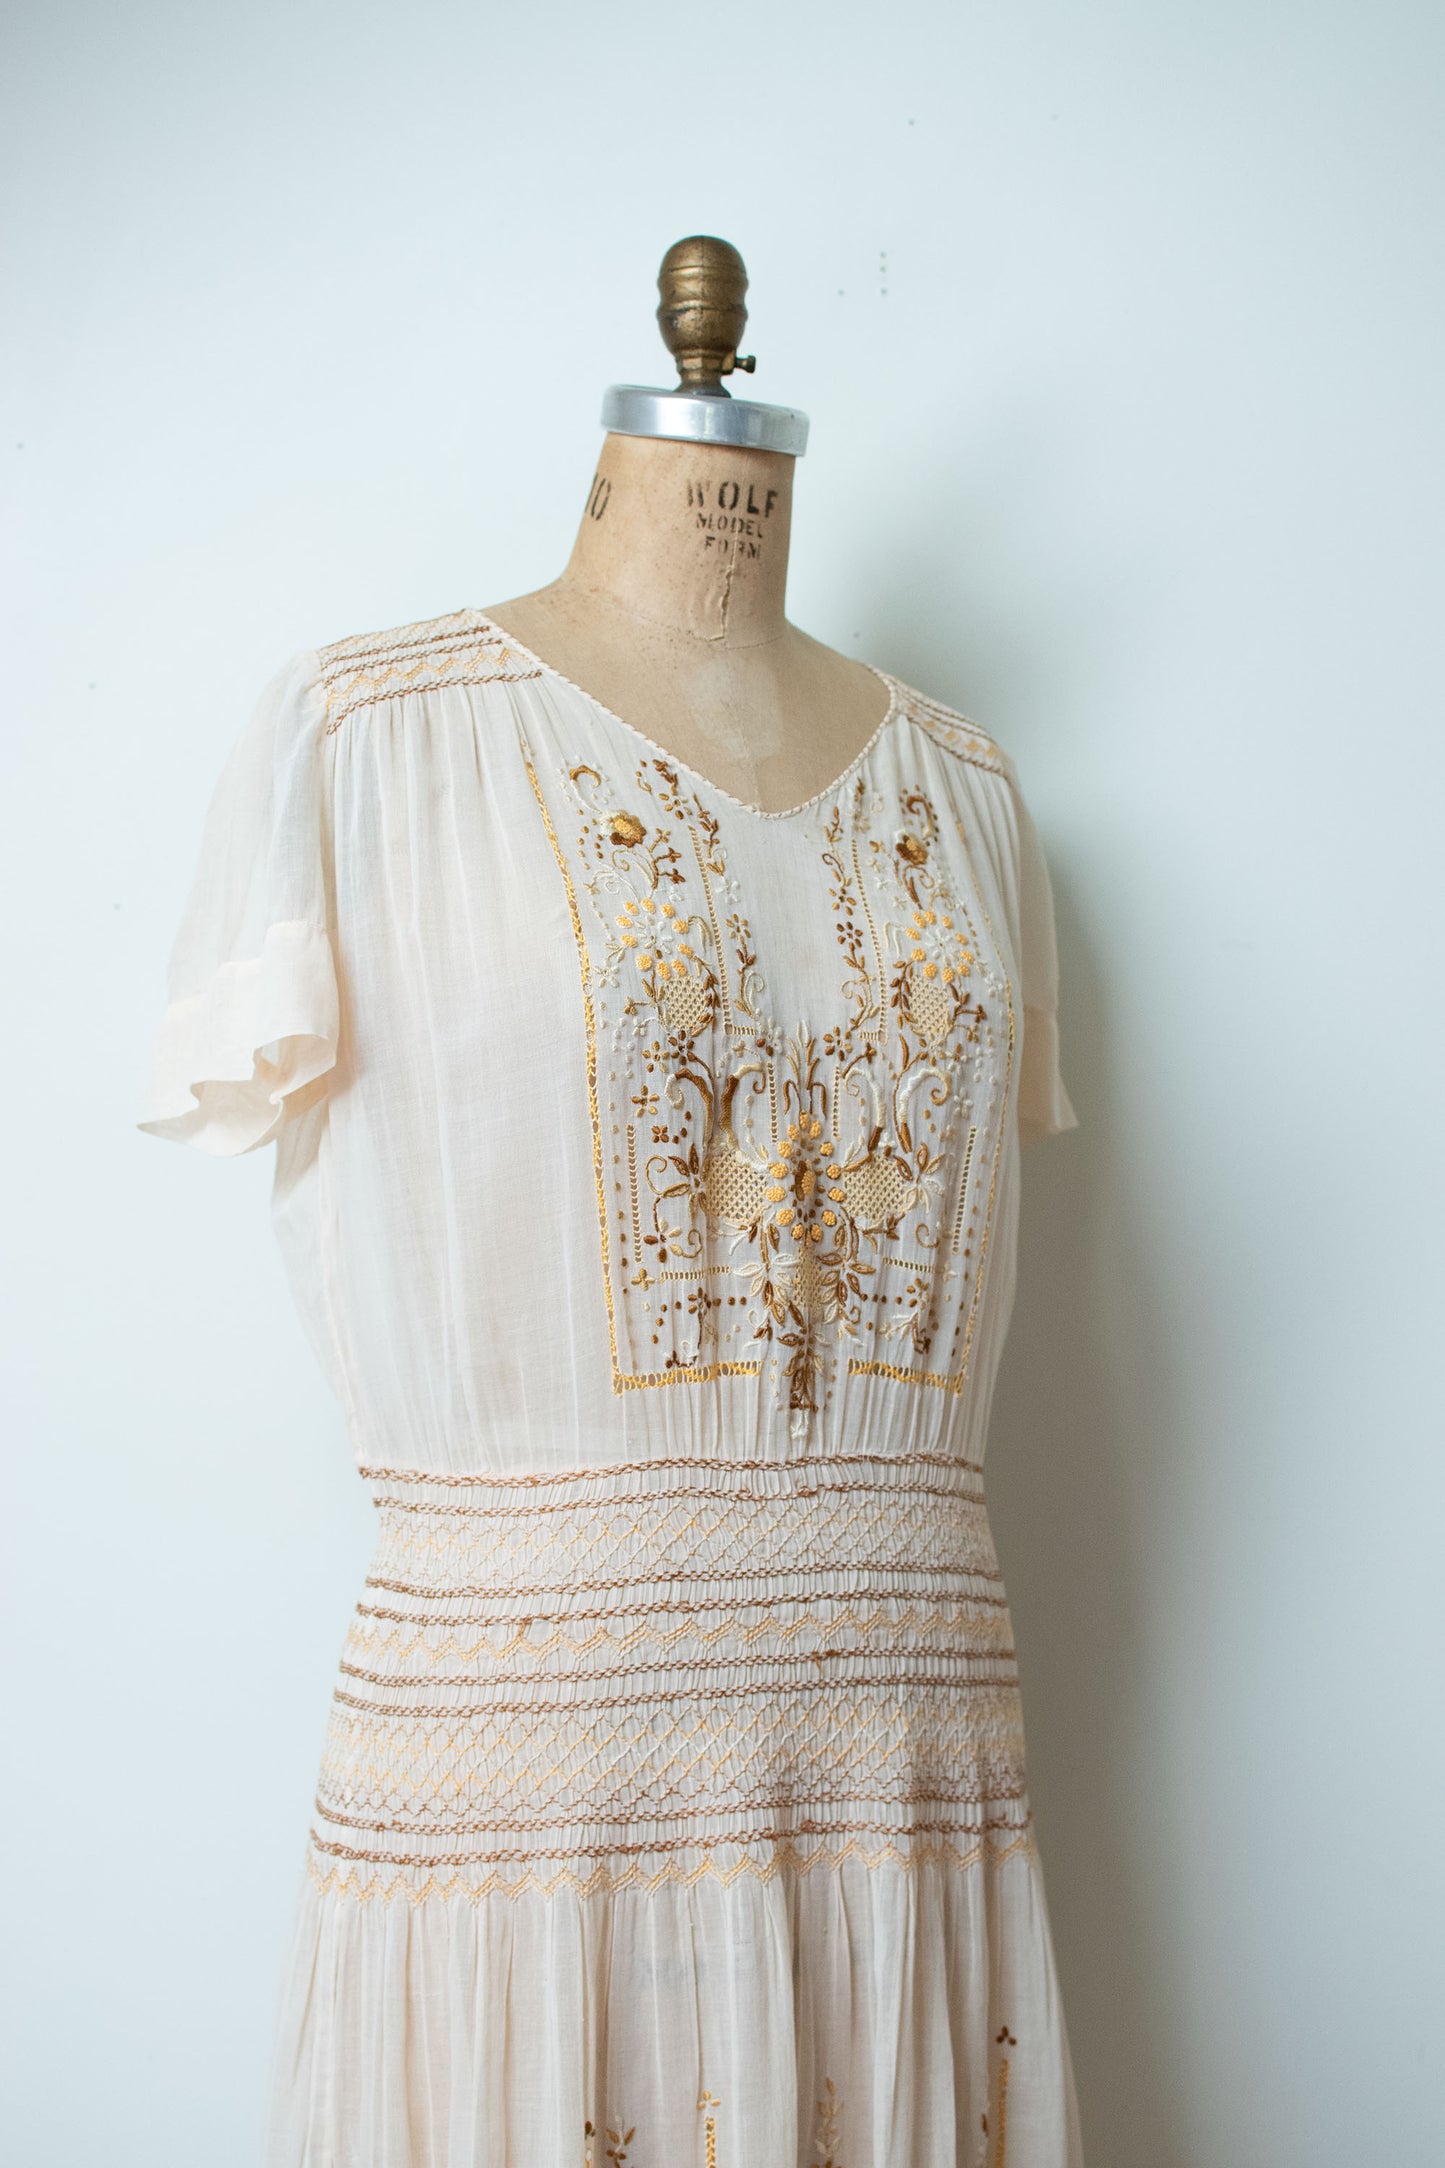 1920s Embroidered Hungarian Dress